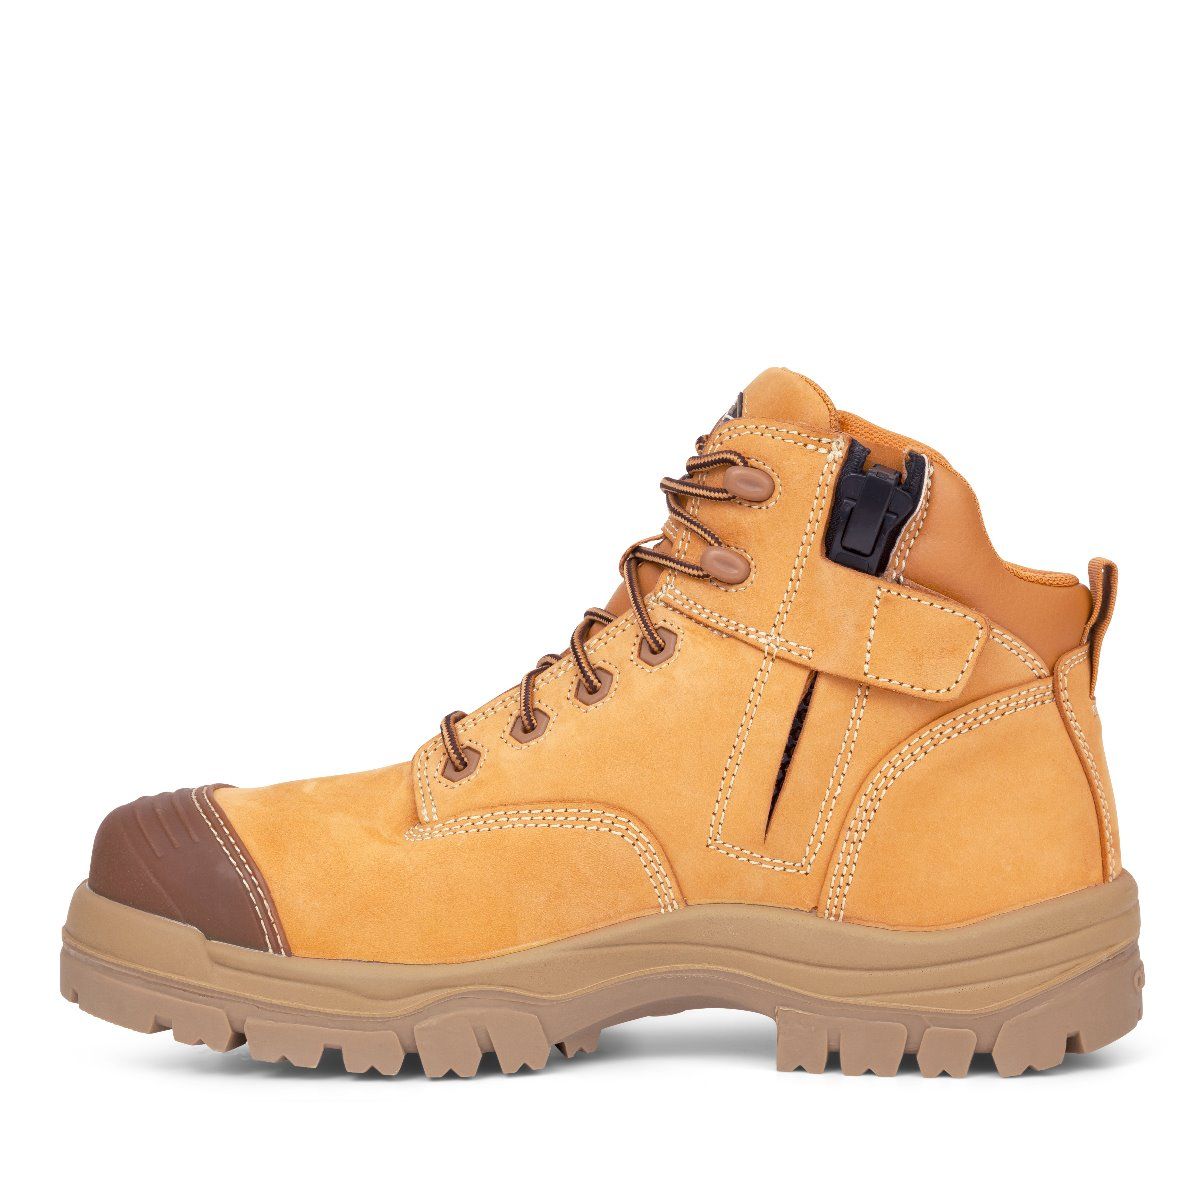 Oliver Mens 45-630Z 130mm Zip at Boots Comp tpu Wheat 10